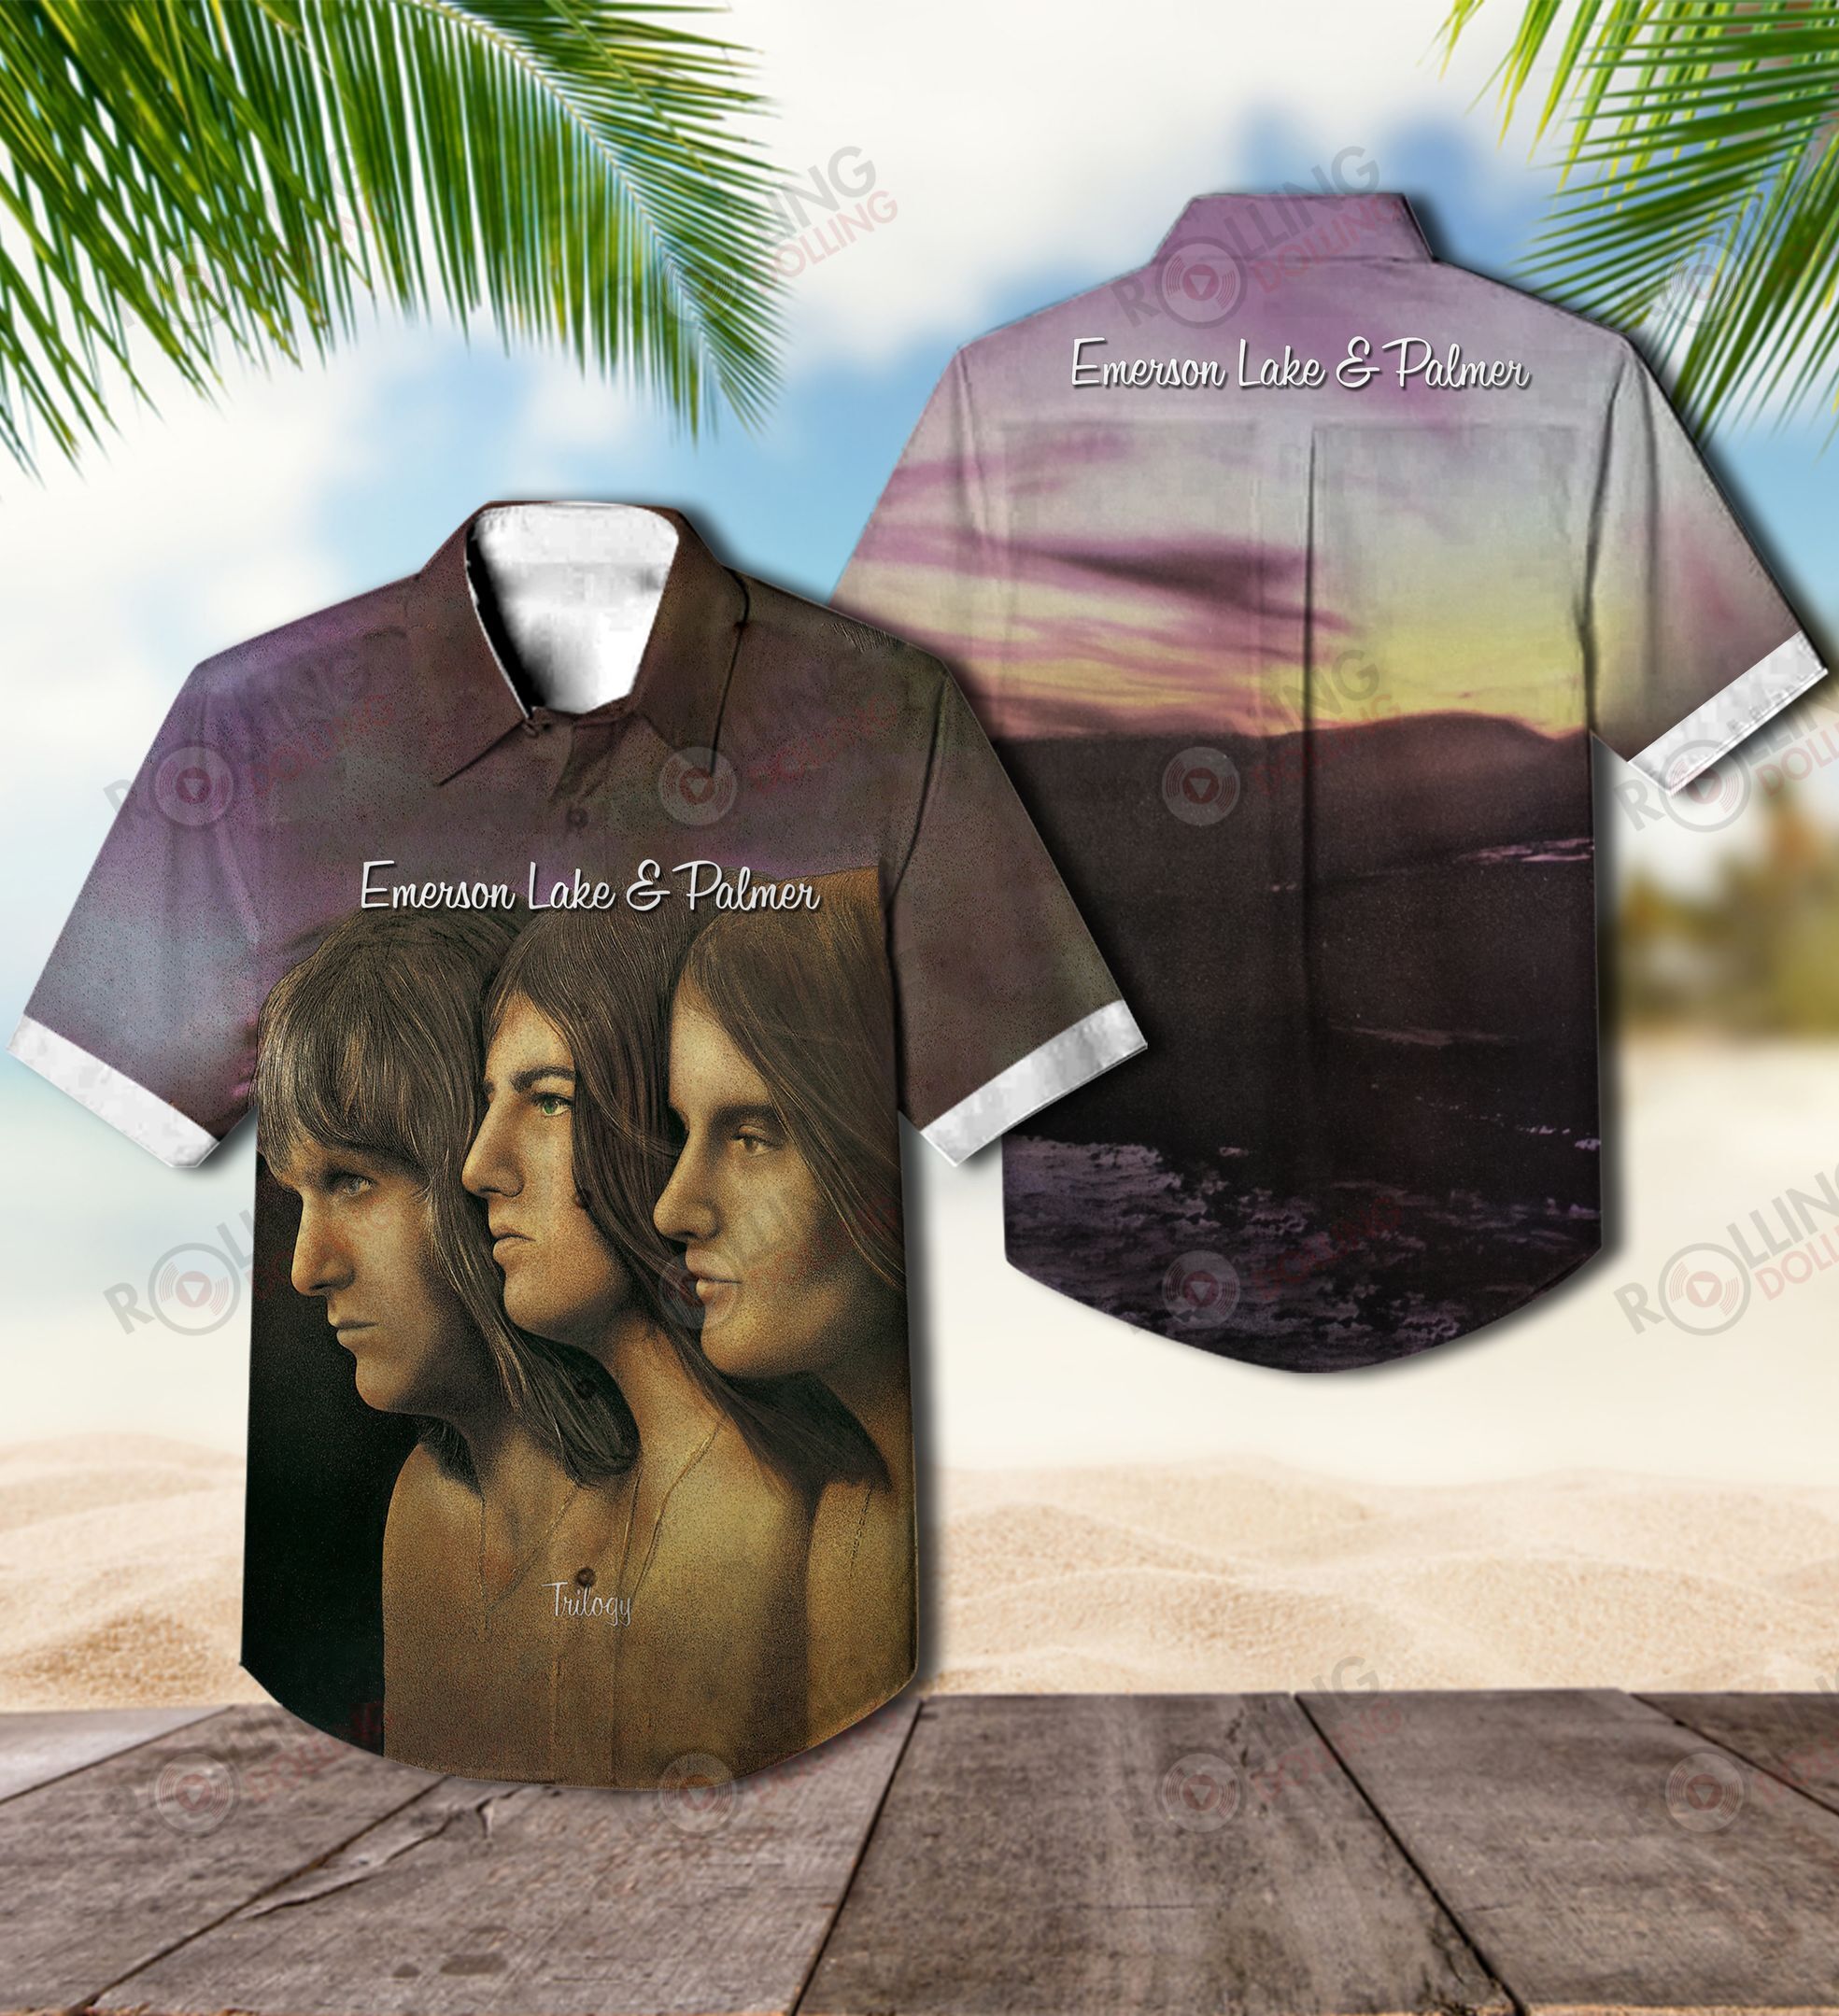 The Hawaiian Shirt is a popular shirt that is worn by Rock band fans 66